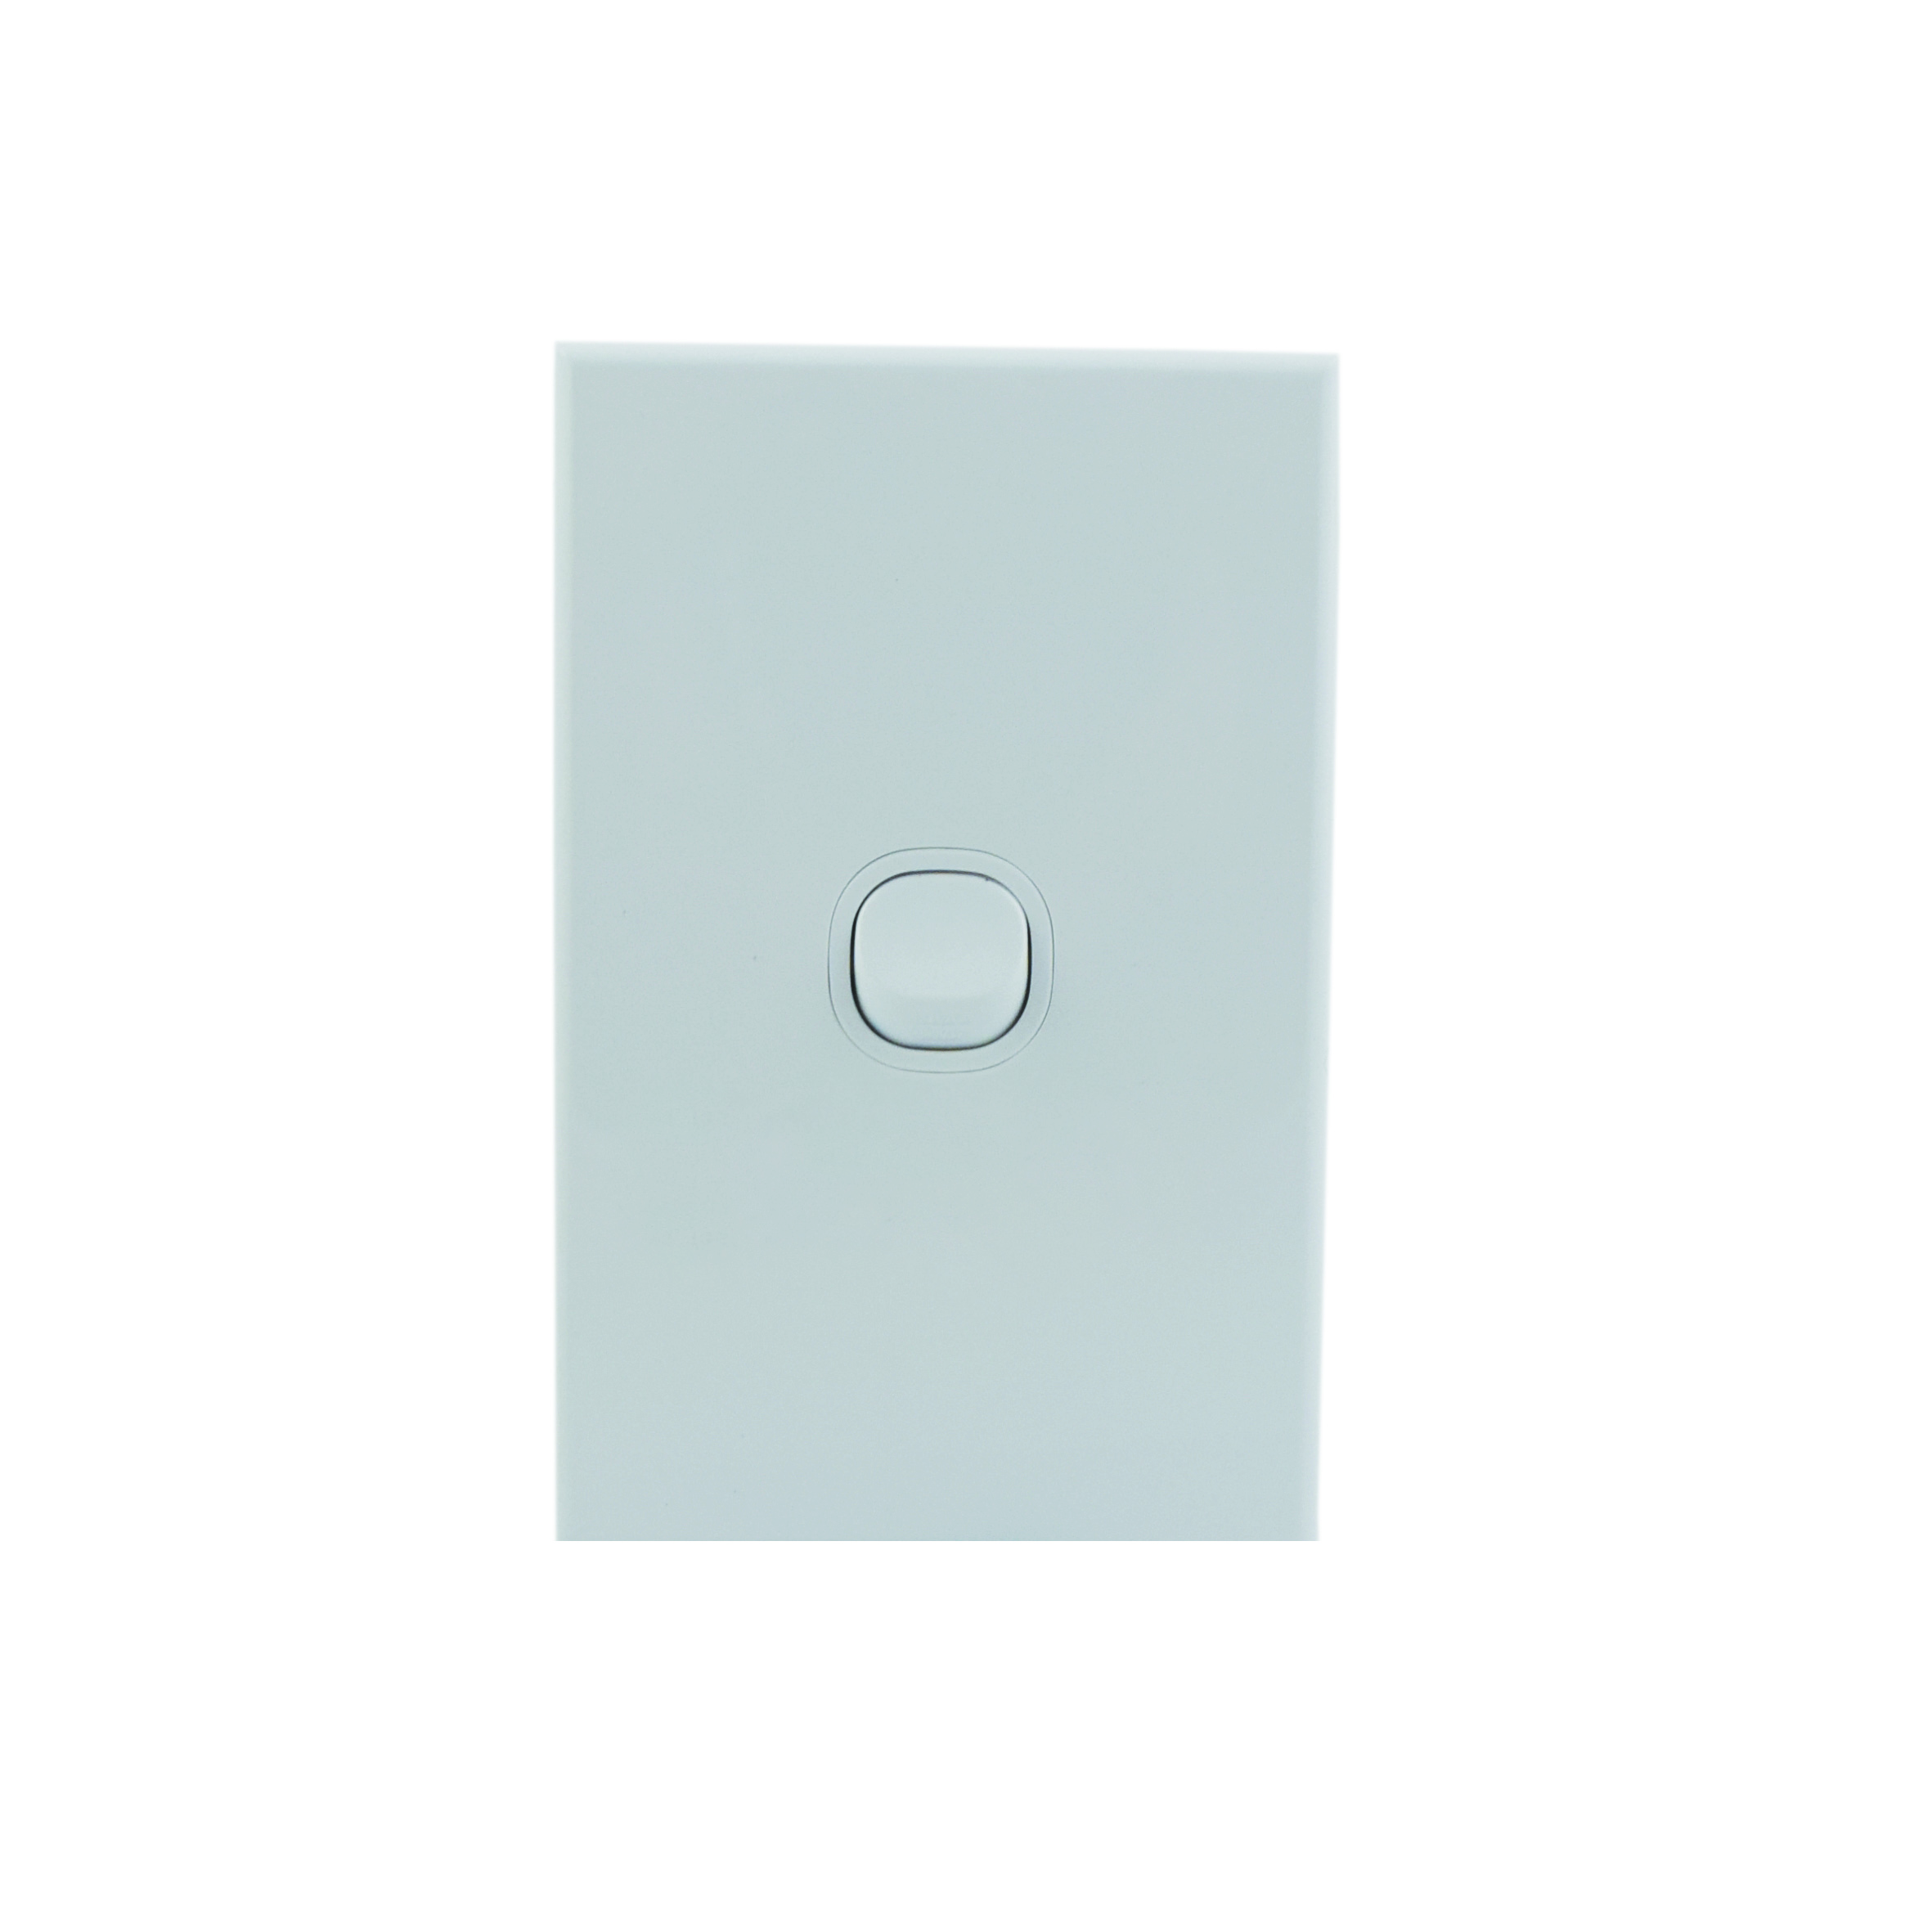 16A, 1 Gang Switch, White, Home